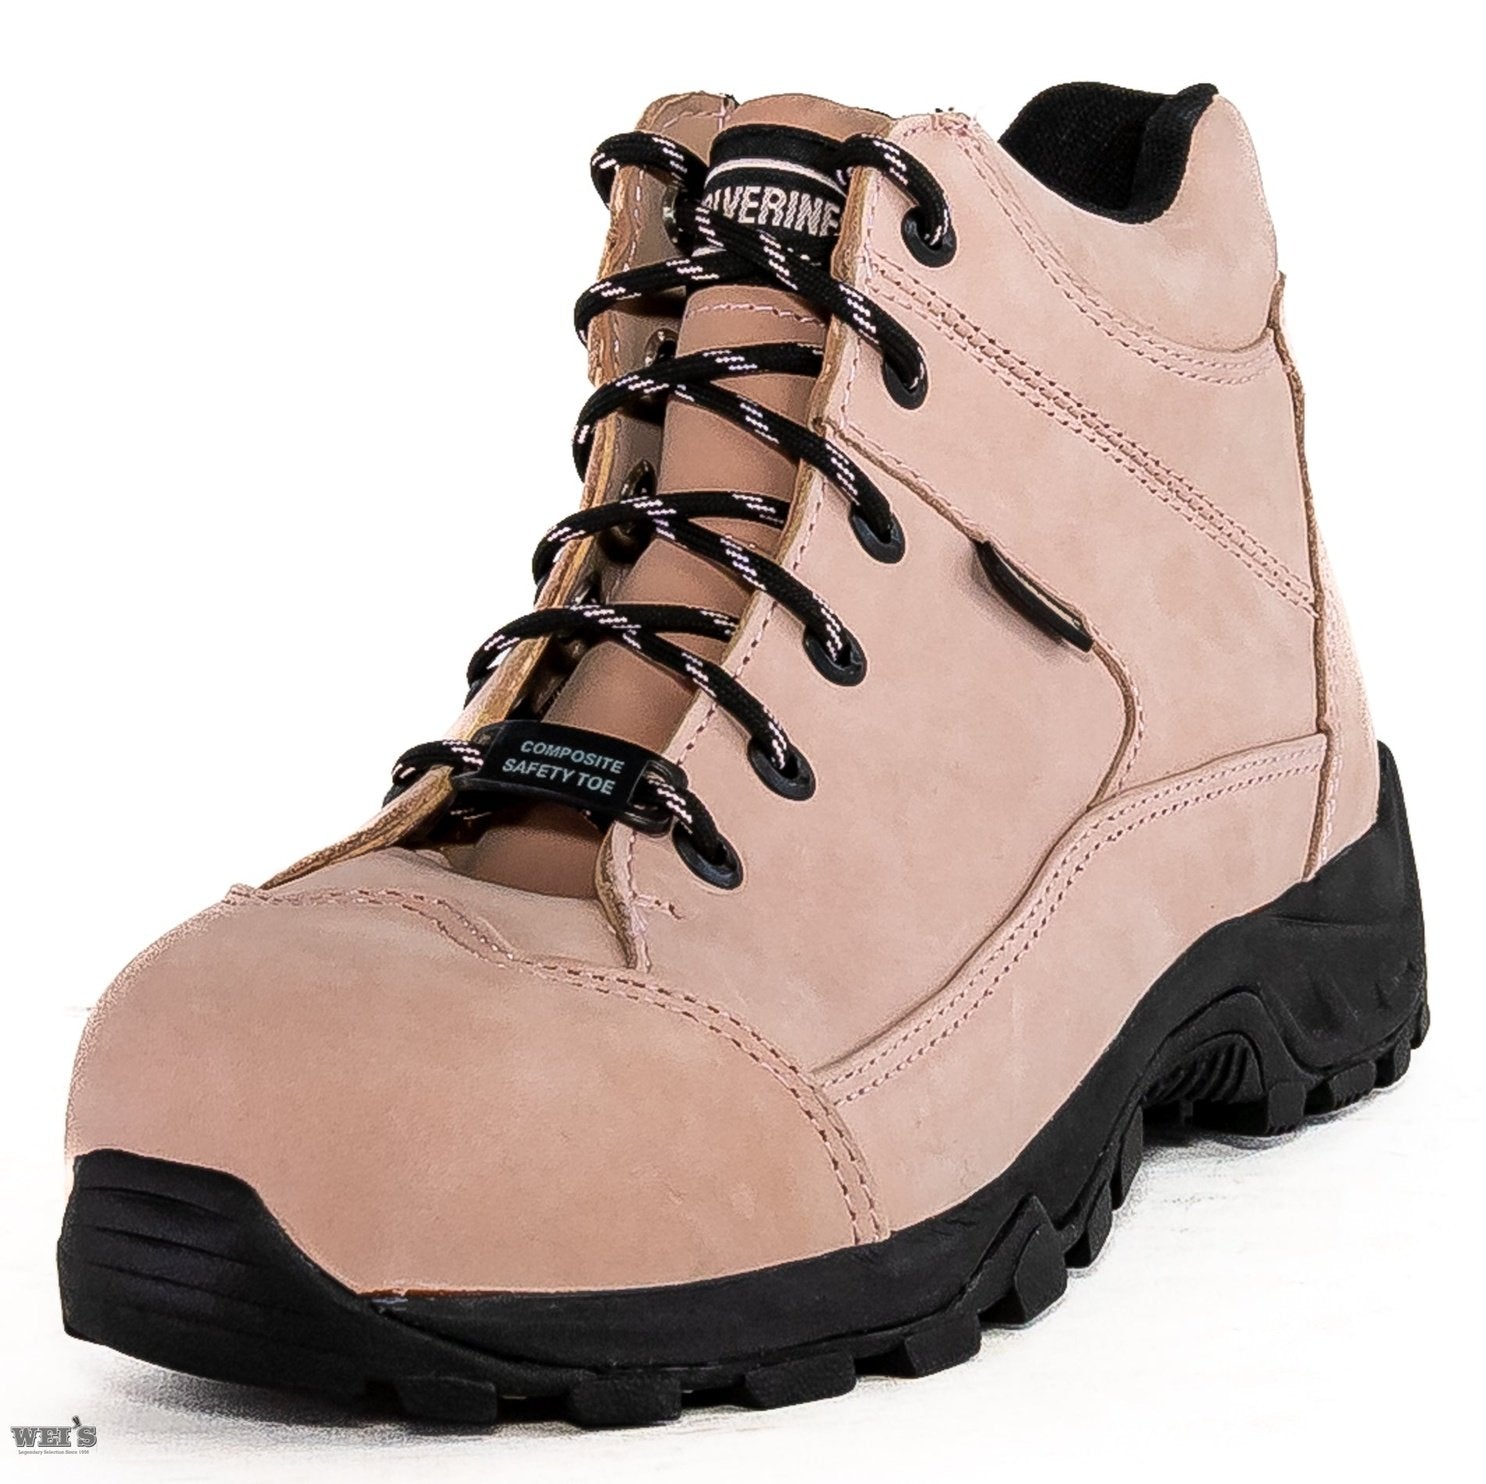 Wolverine Women's Work Boot 6" Nomad Hi CSA Comp Toe Various Colours - Wolverine Boots